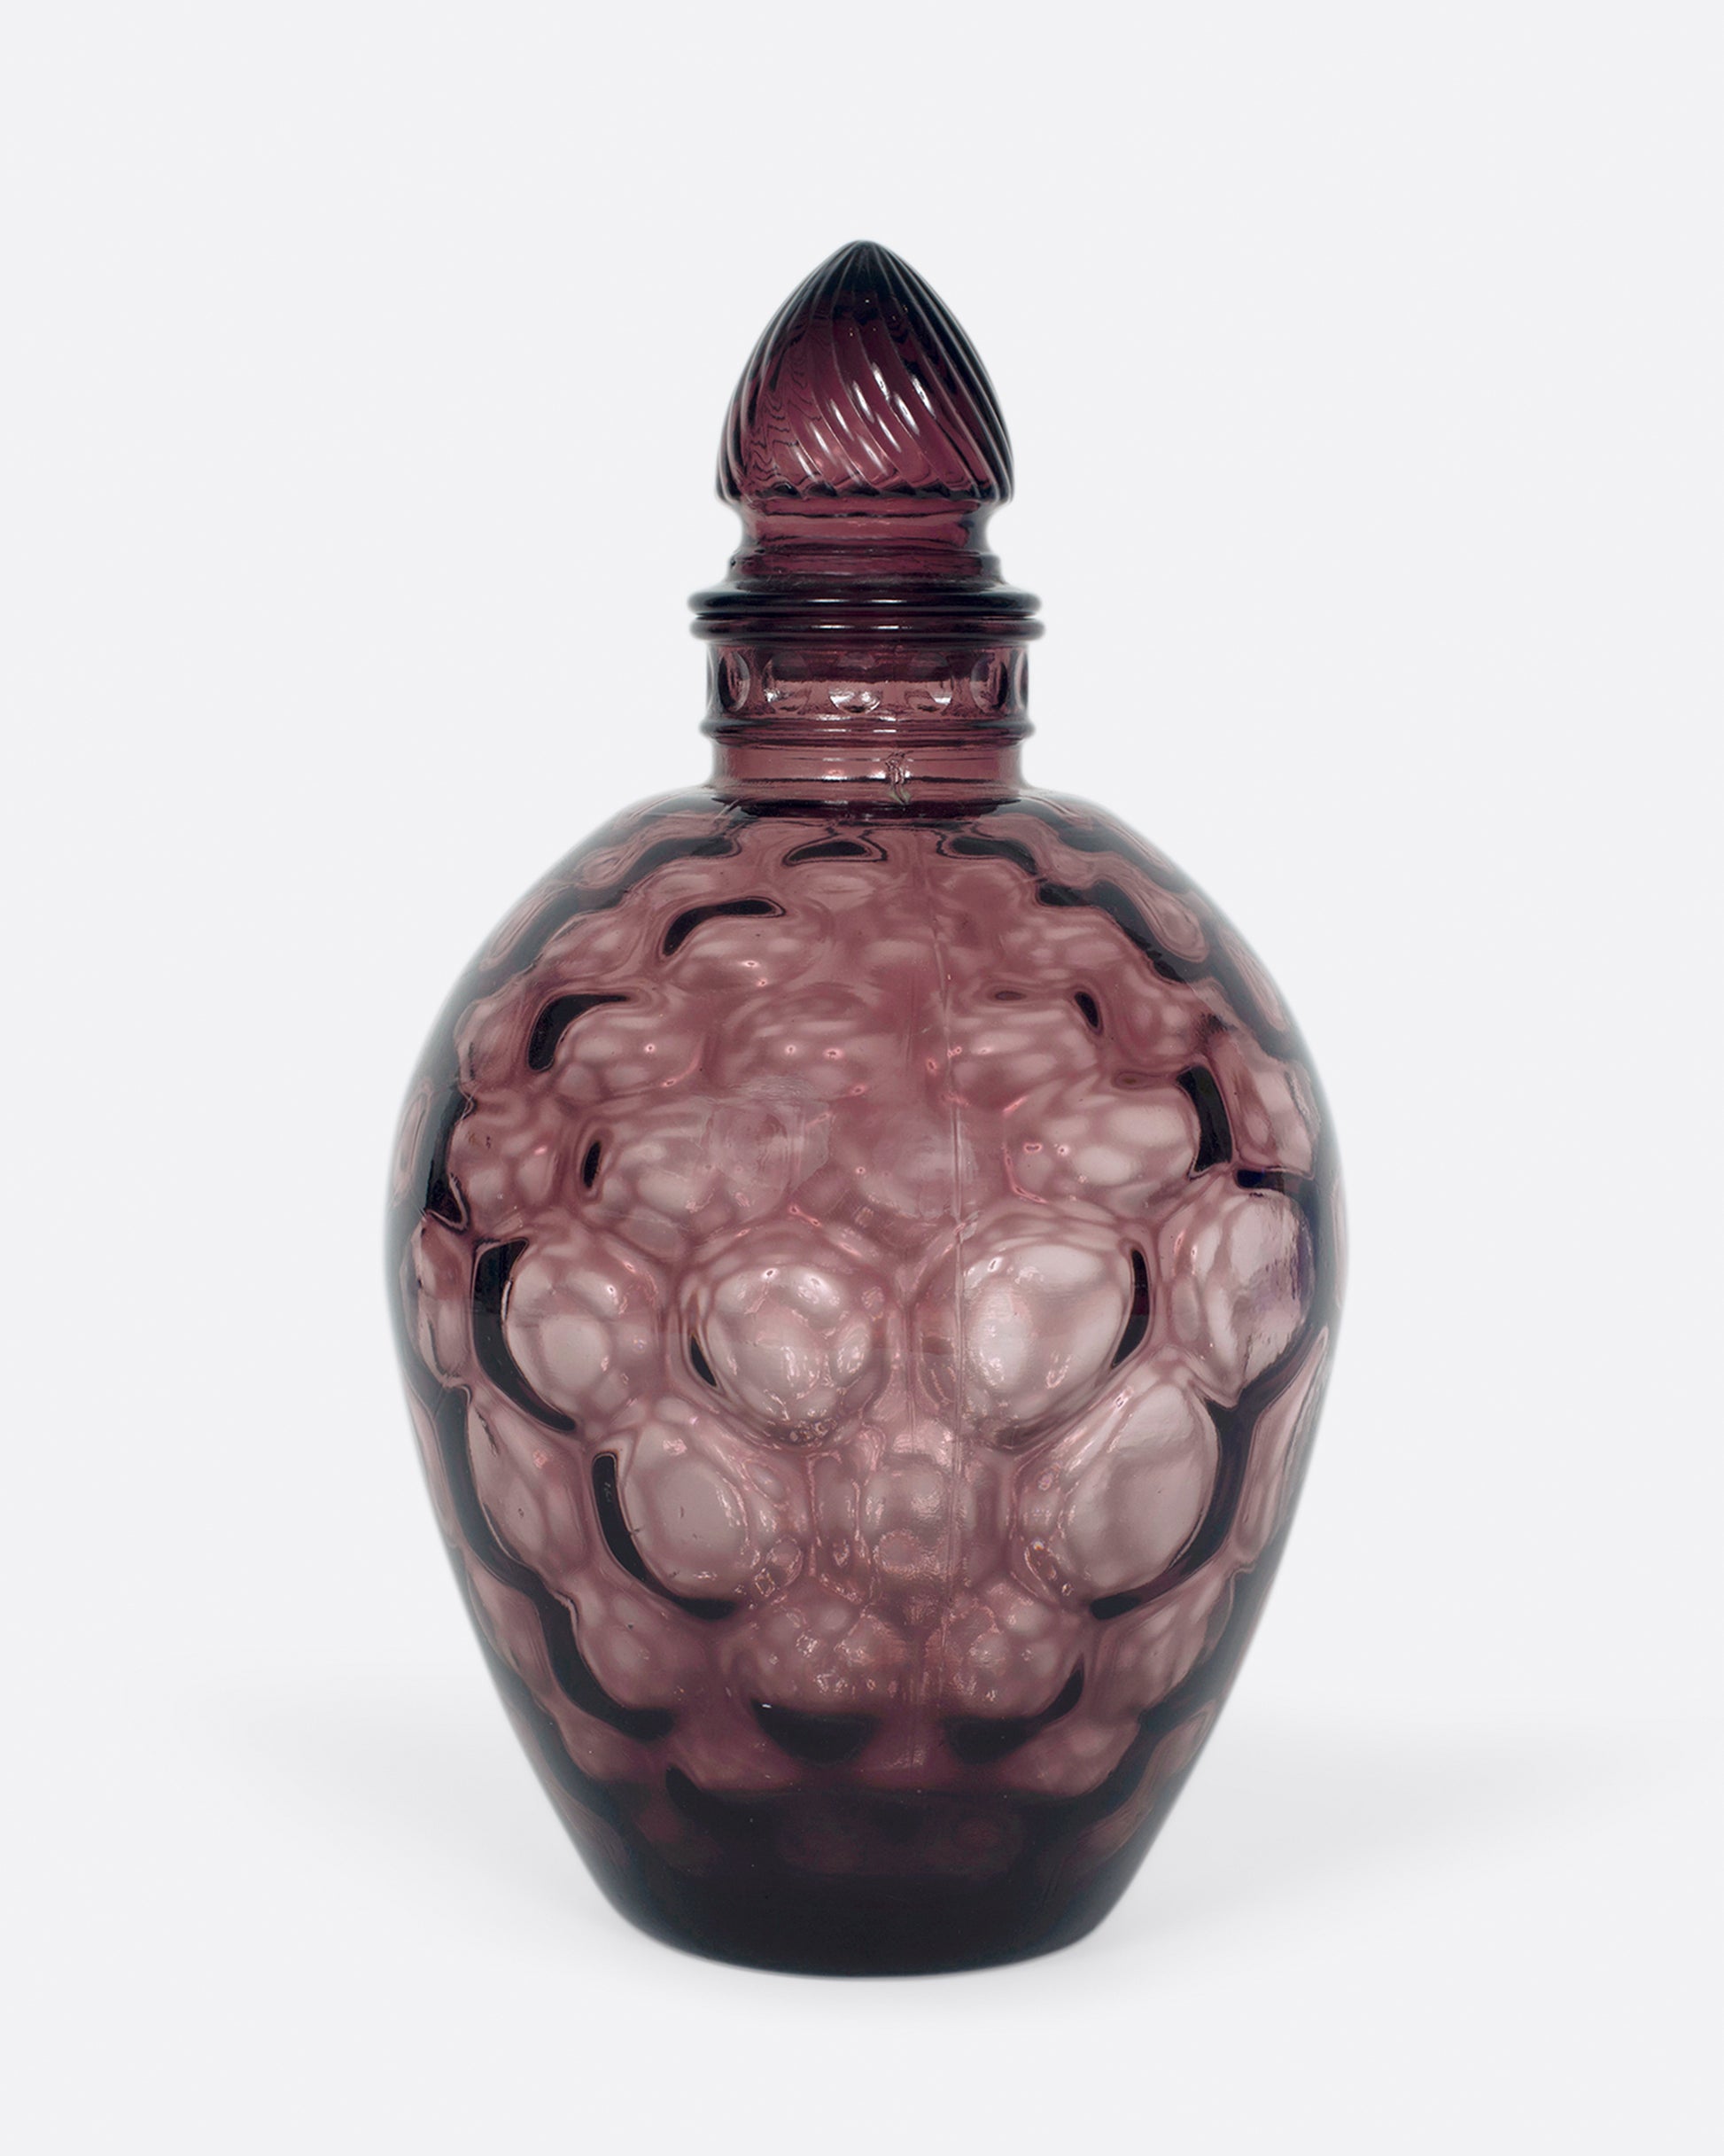 A dark plum, bubble glass bottle with an acorn-shaped stopper.